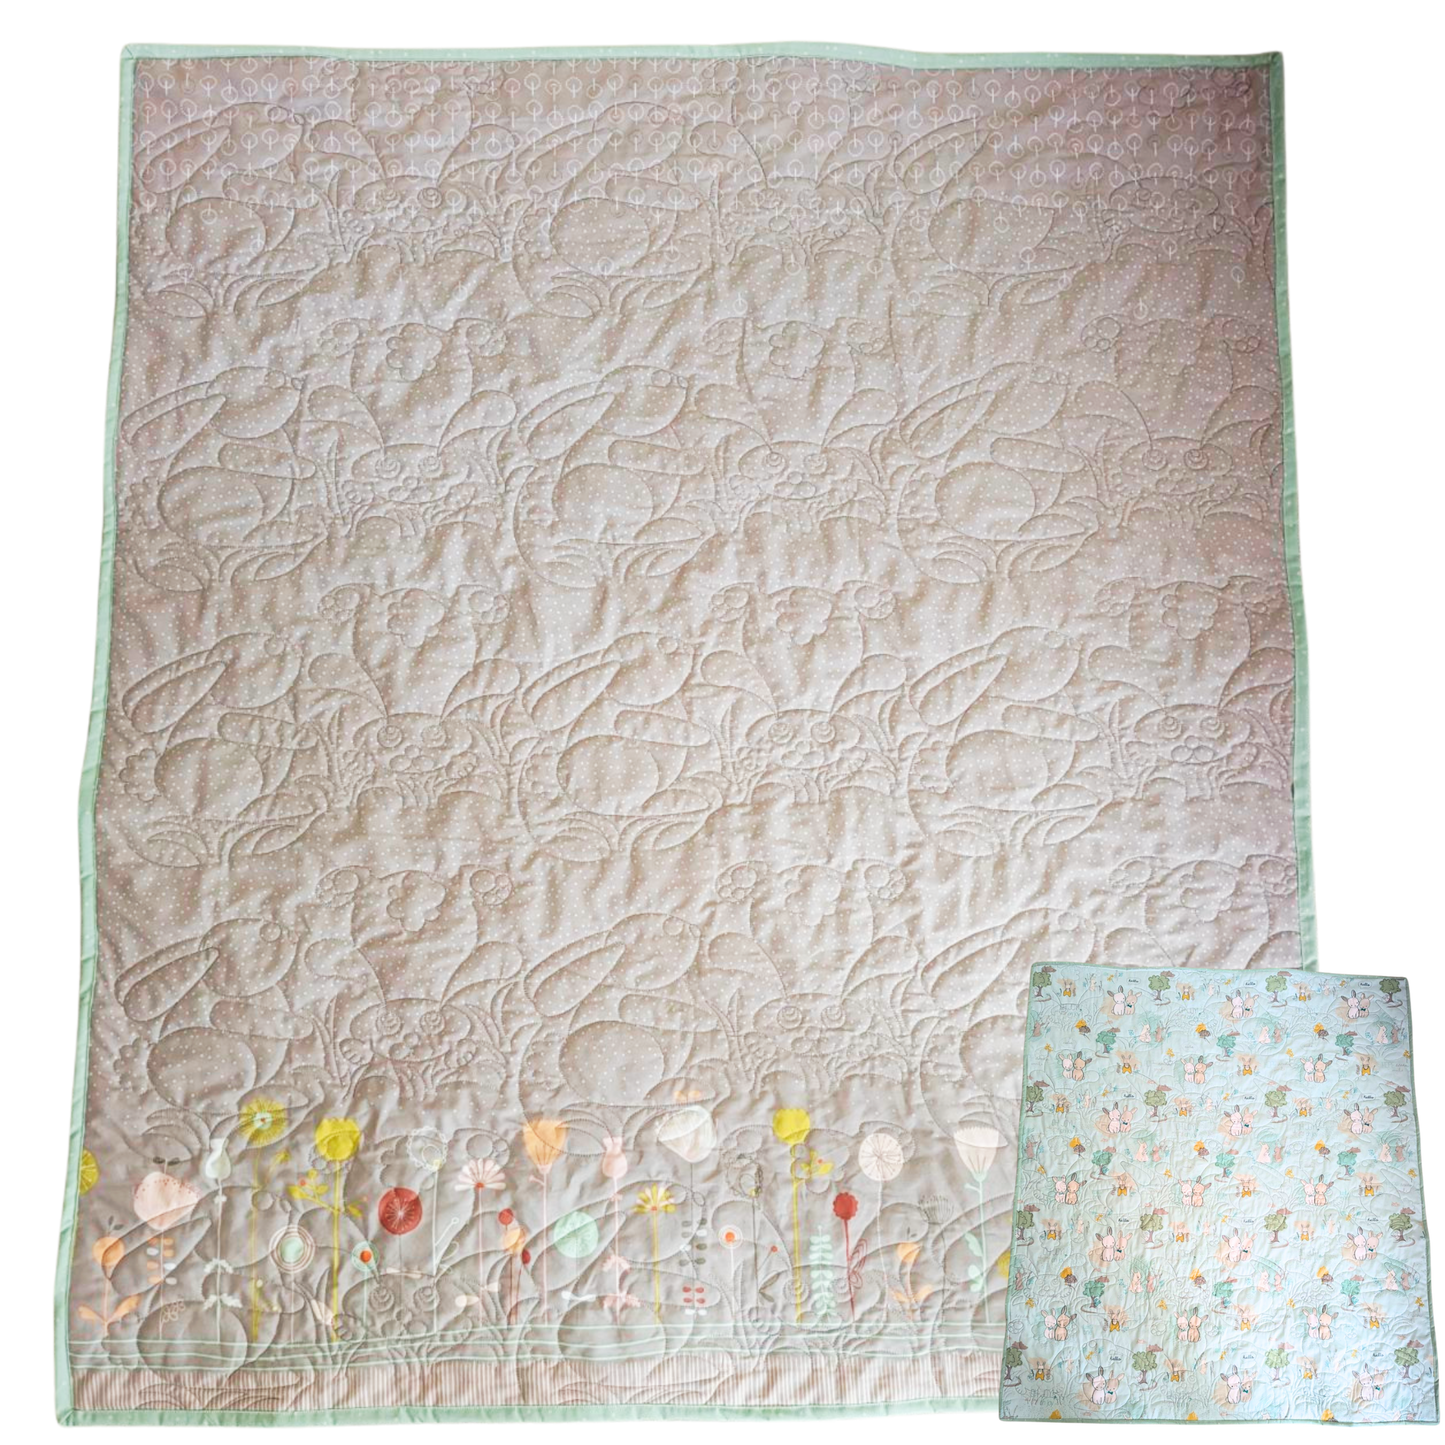 Bunnies Among the Grass Baby Quilt